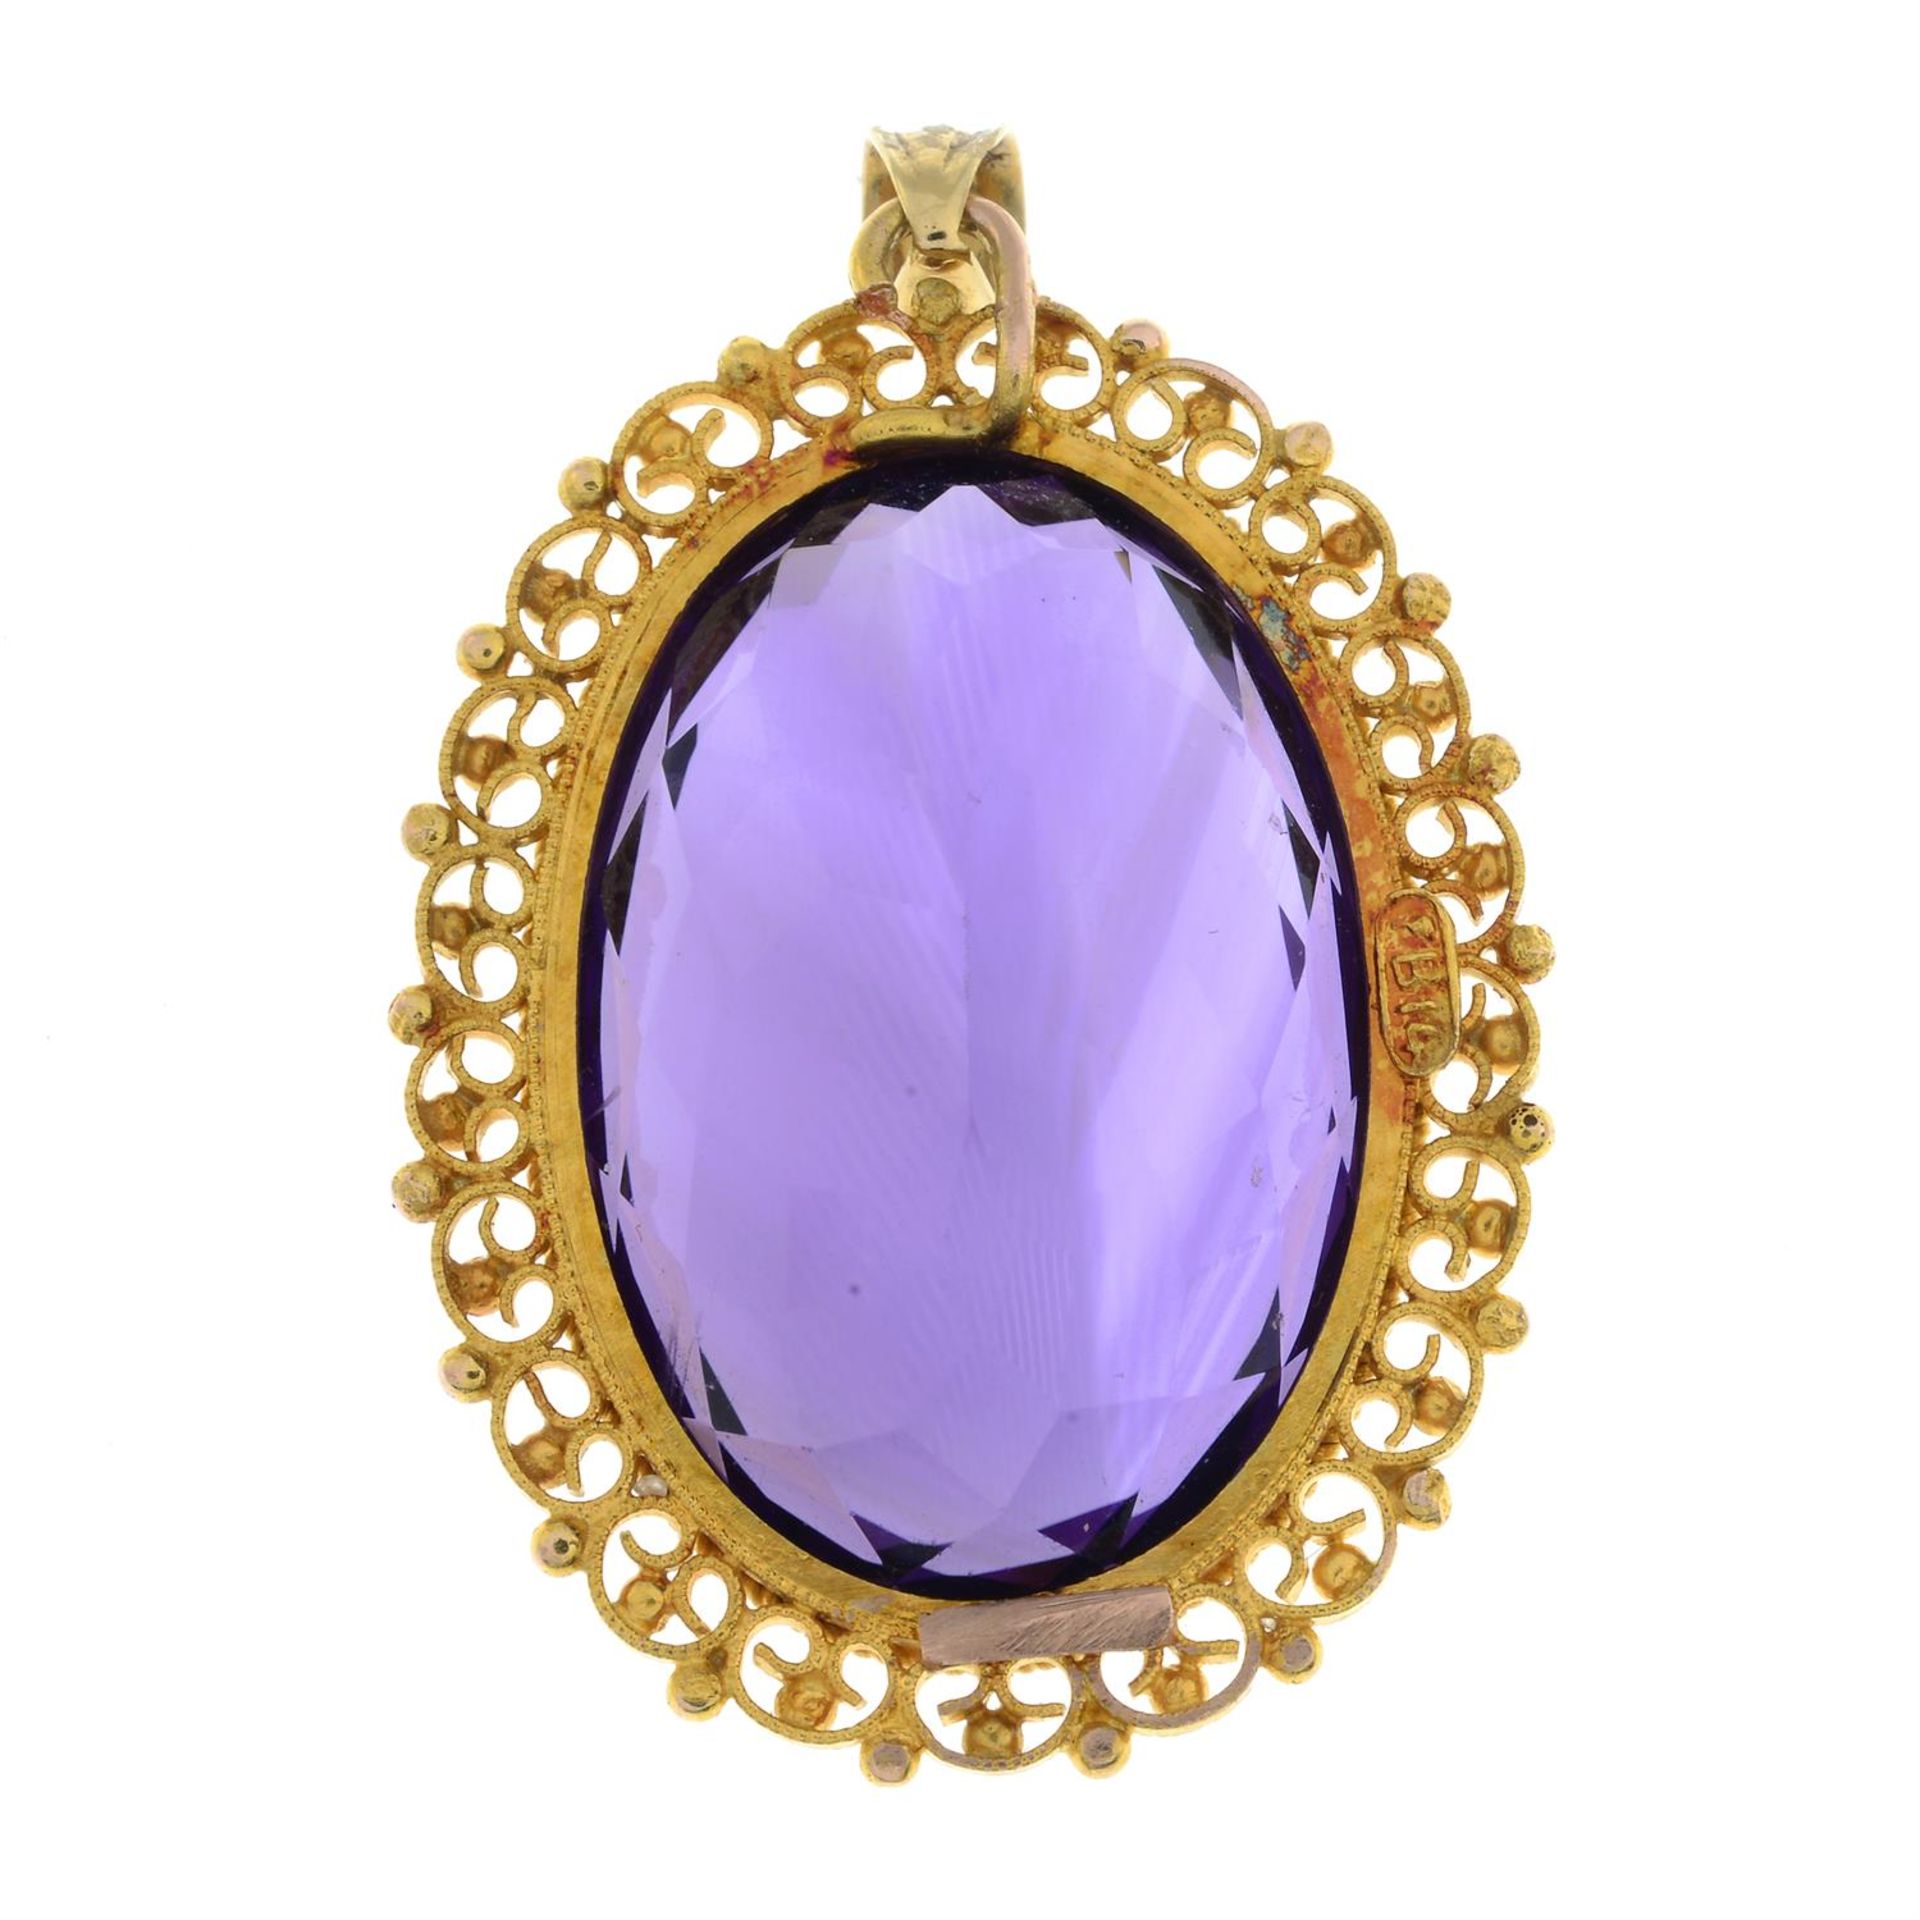 An early 20th century 14ct gold amethyst pendant. - Image 3 of 4